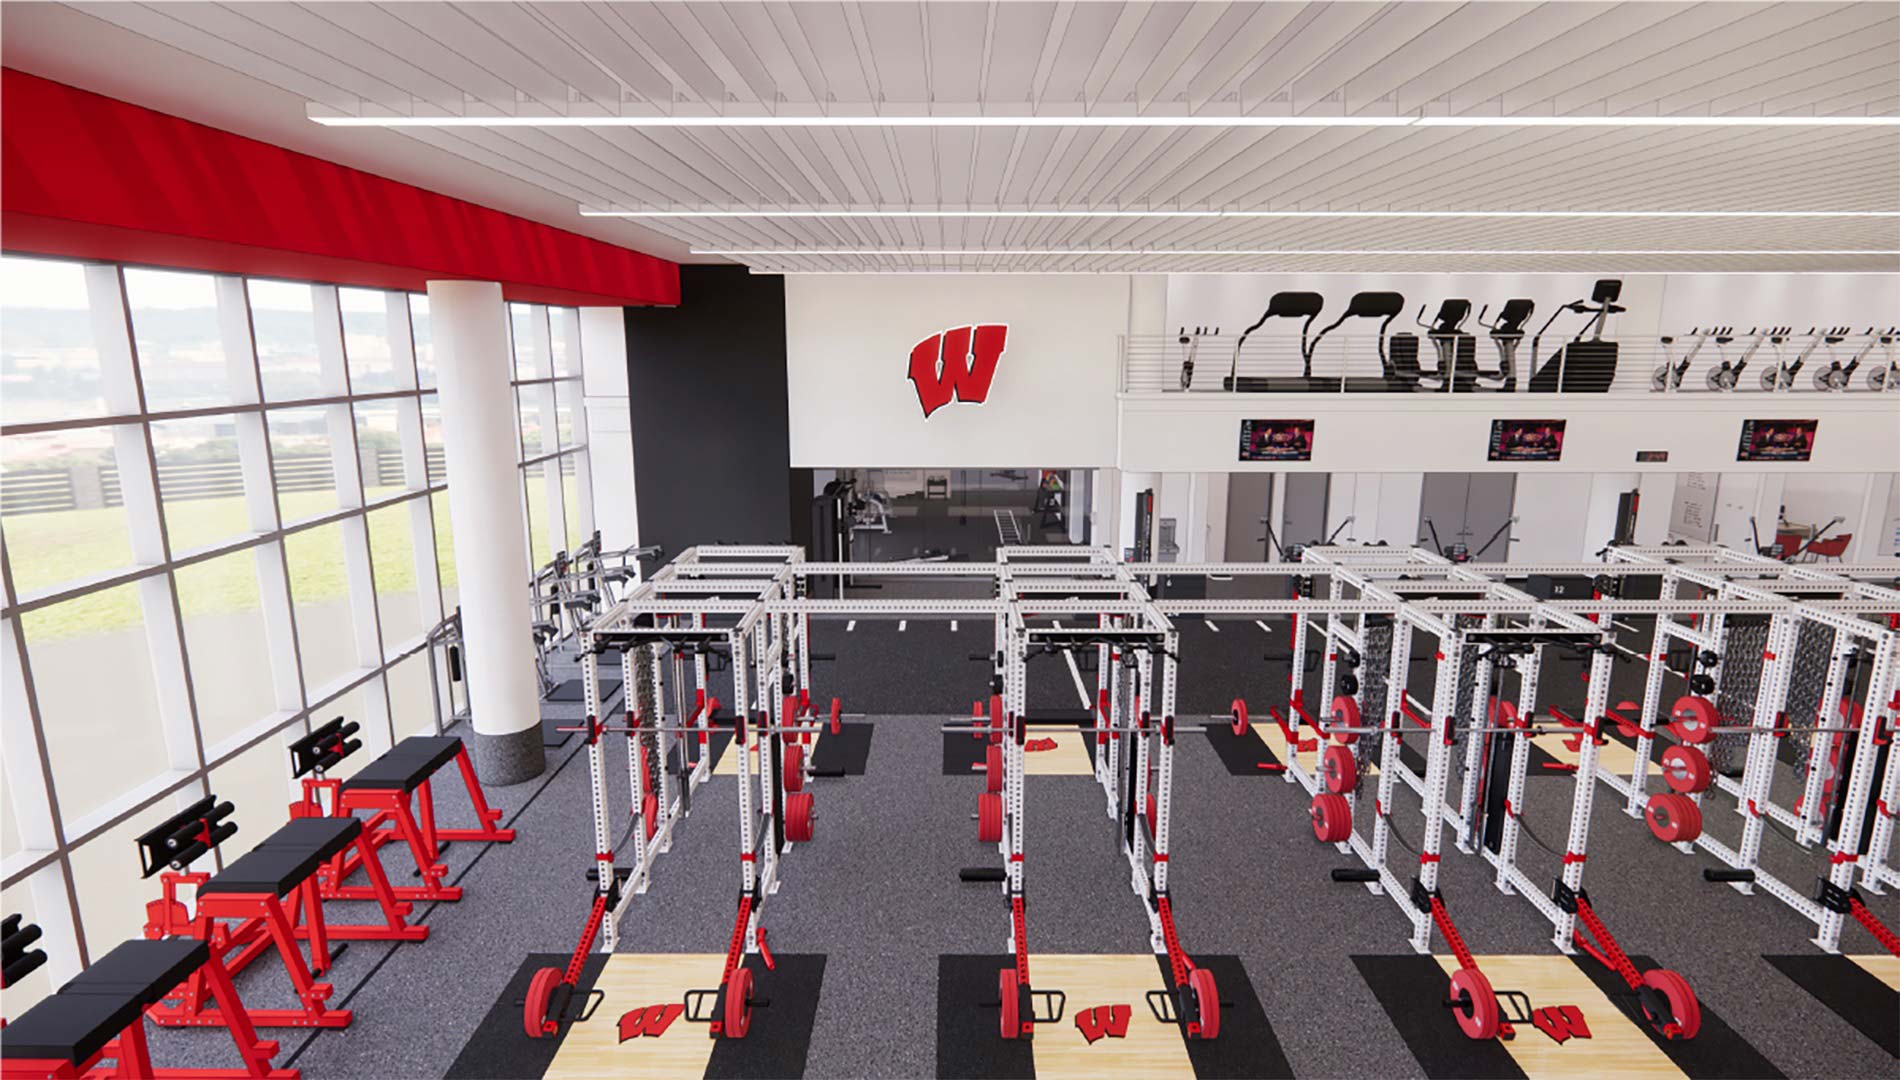 A rendering view looking down into a workout space filled with equipment such as squat racks, treadmills, and weights.